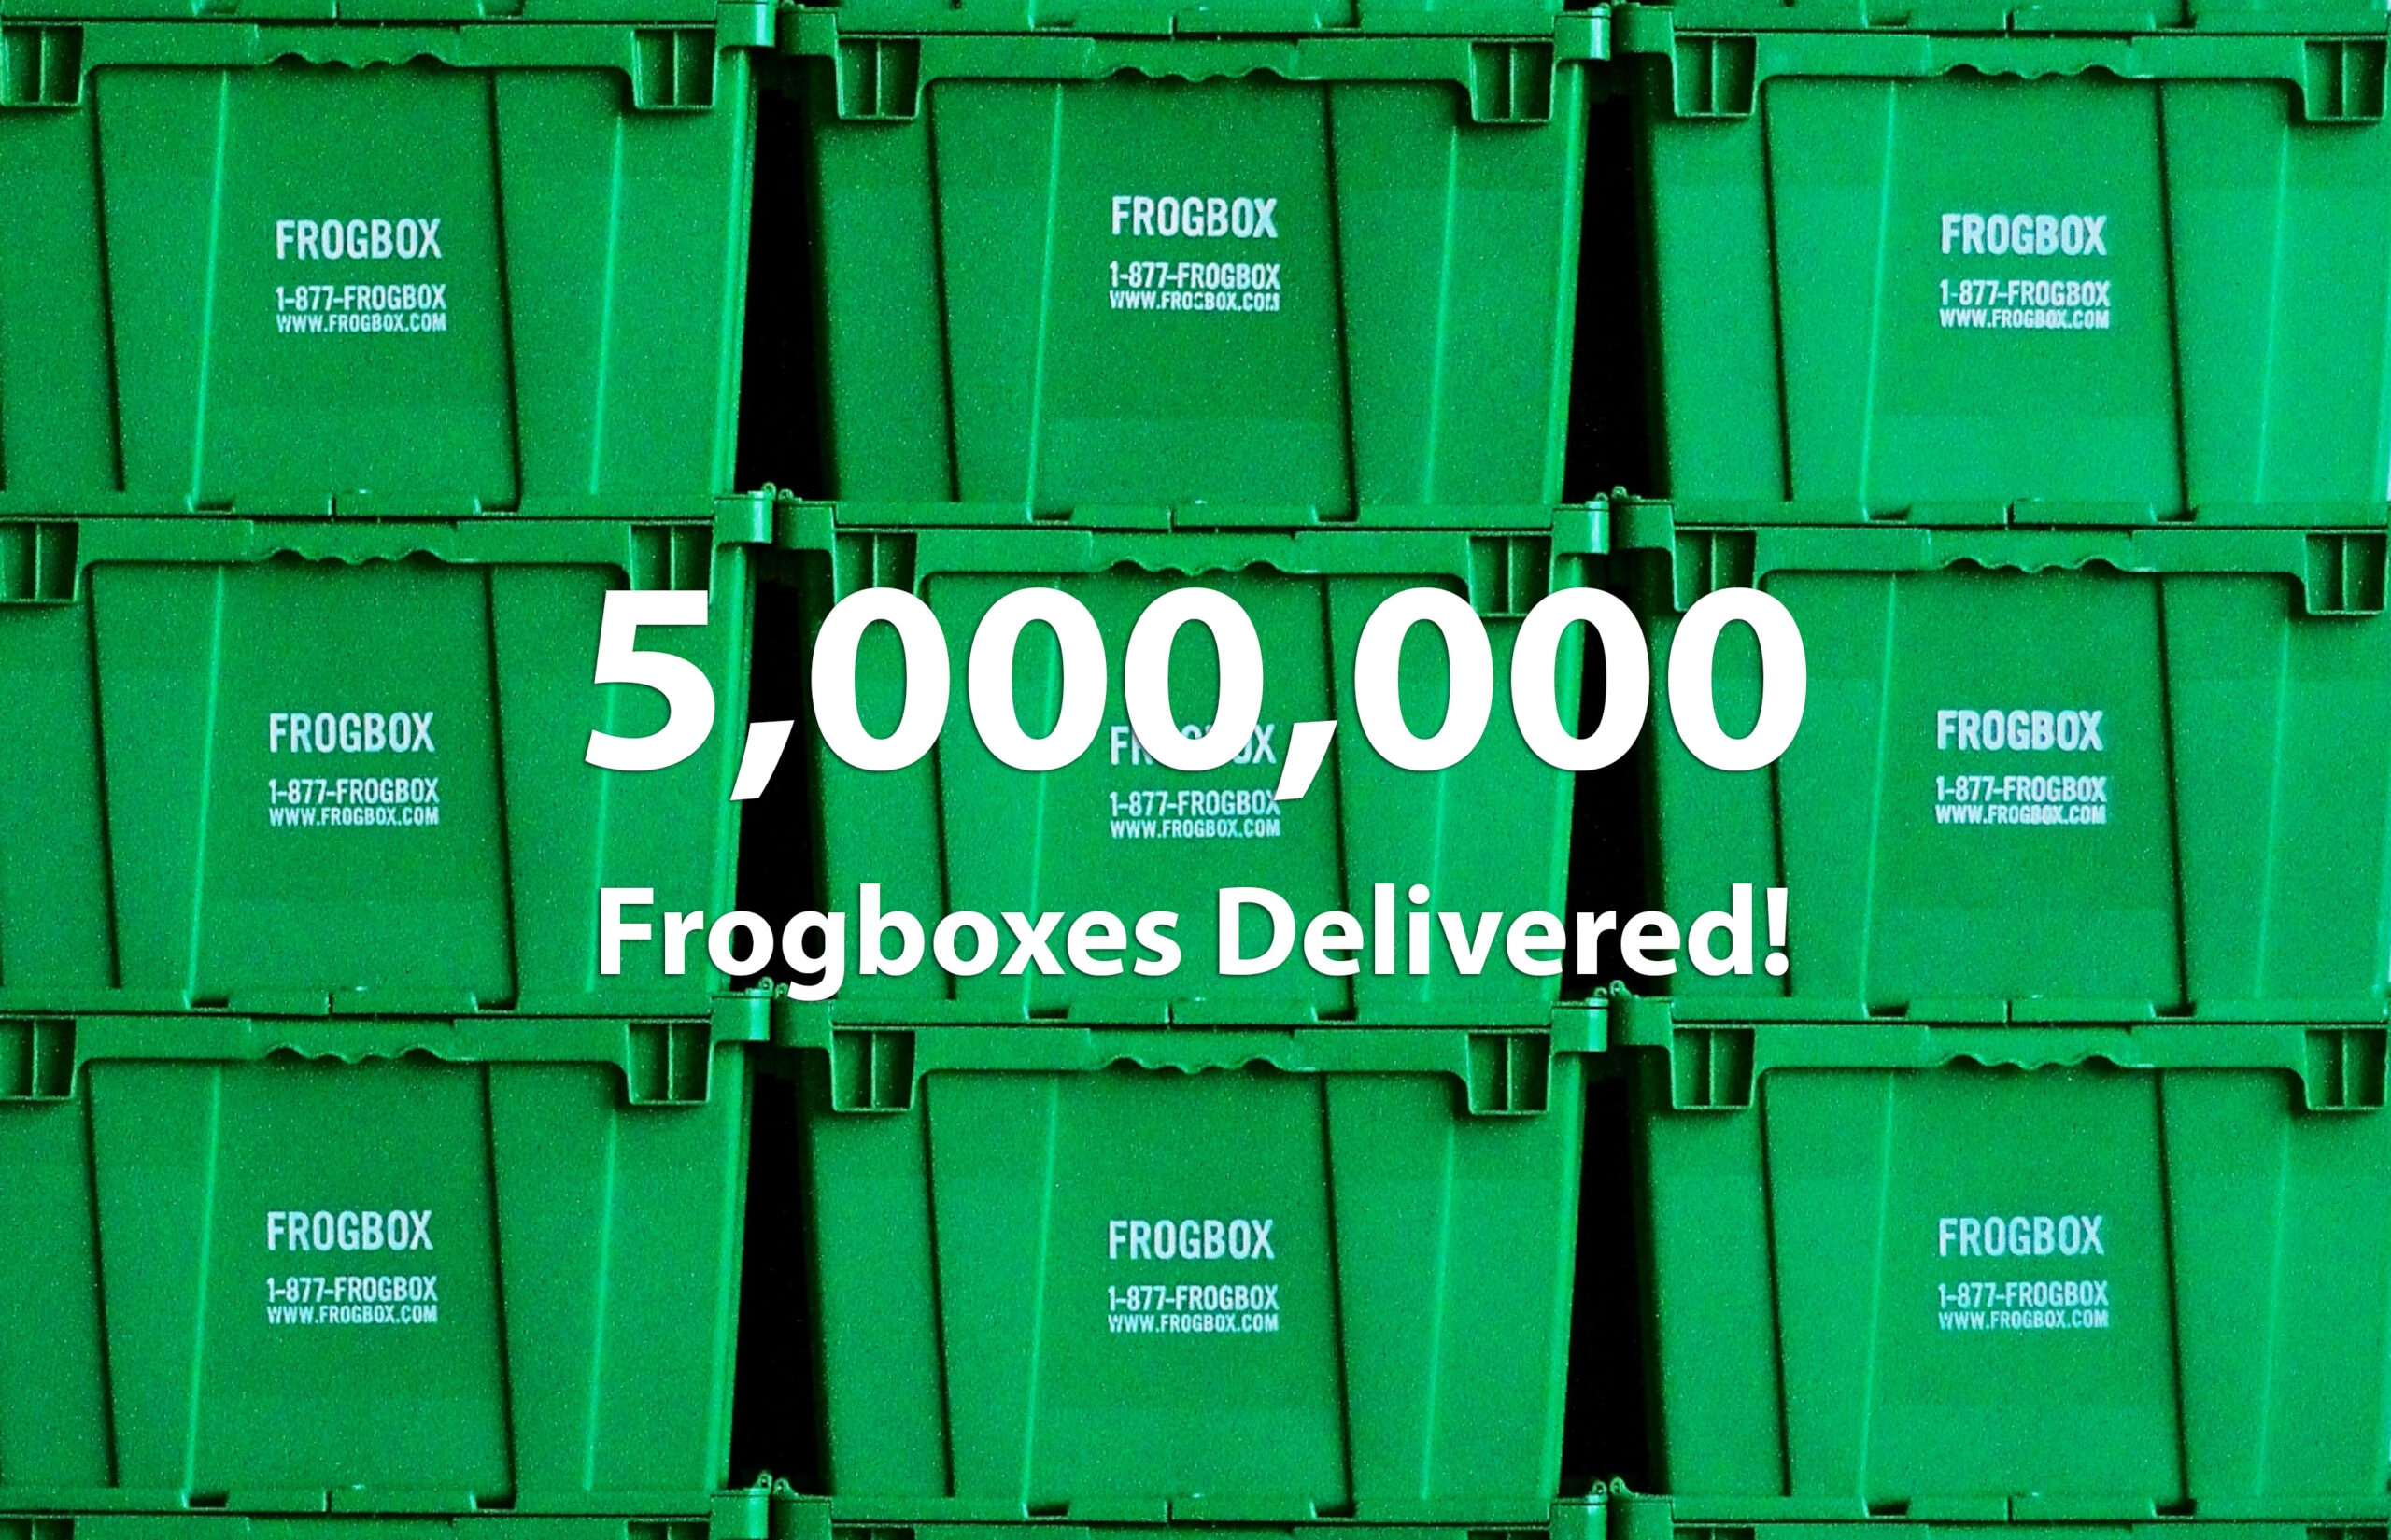 Find a Frogbox Location